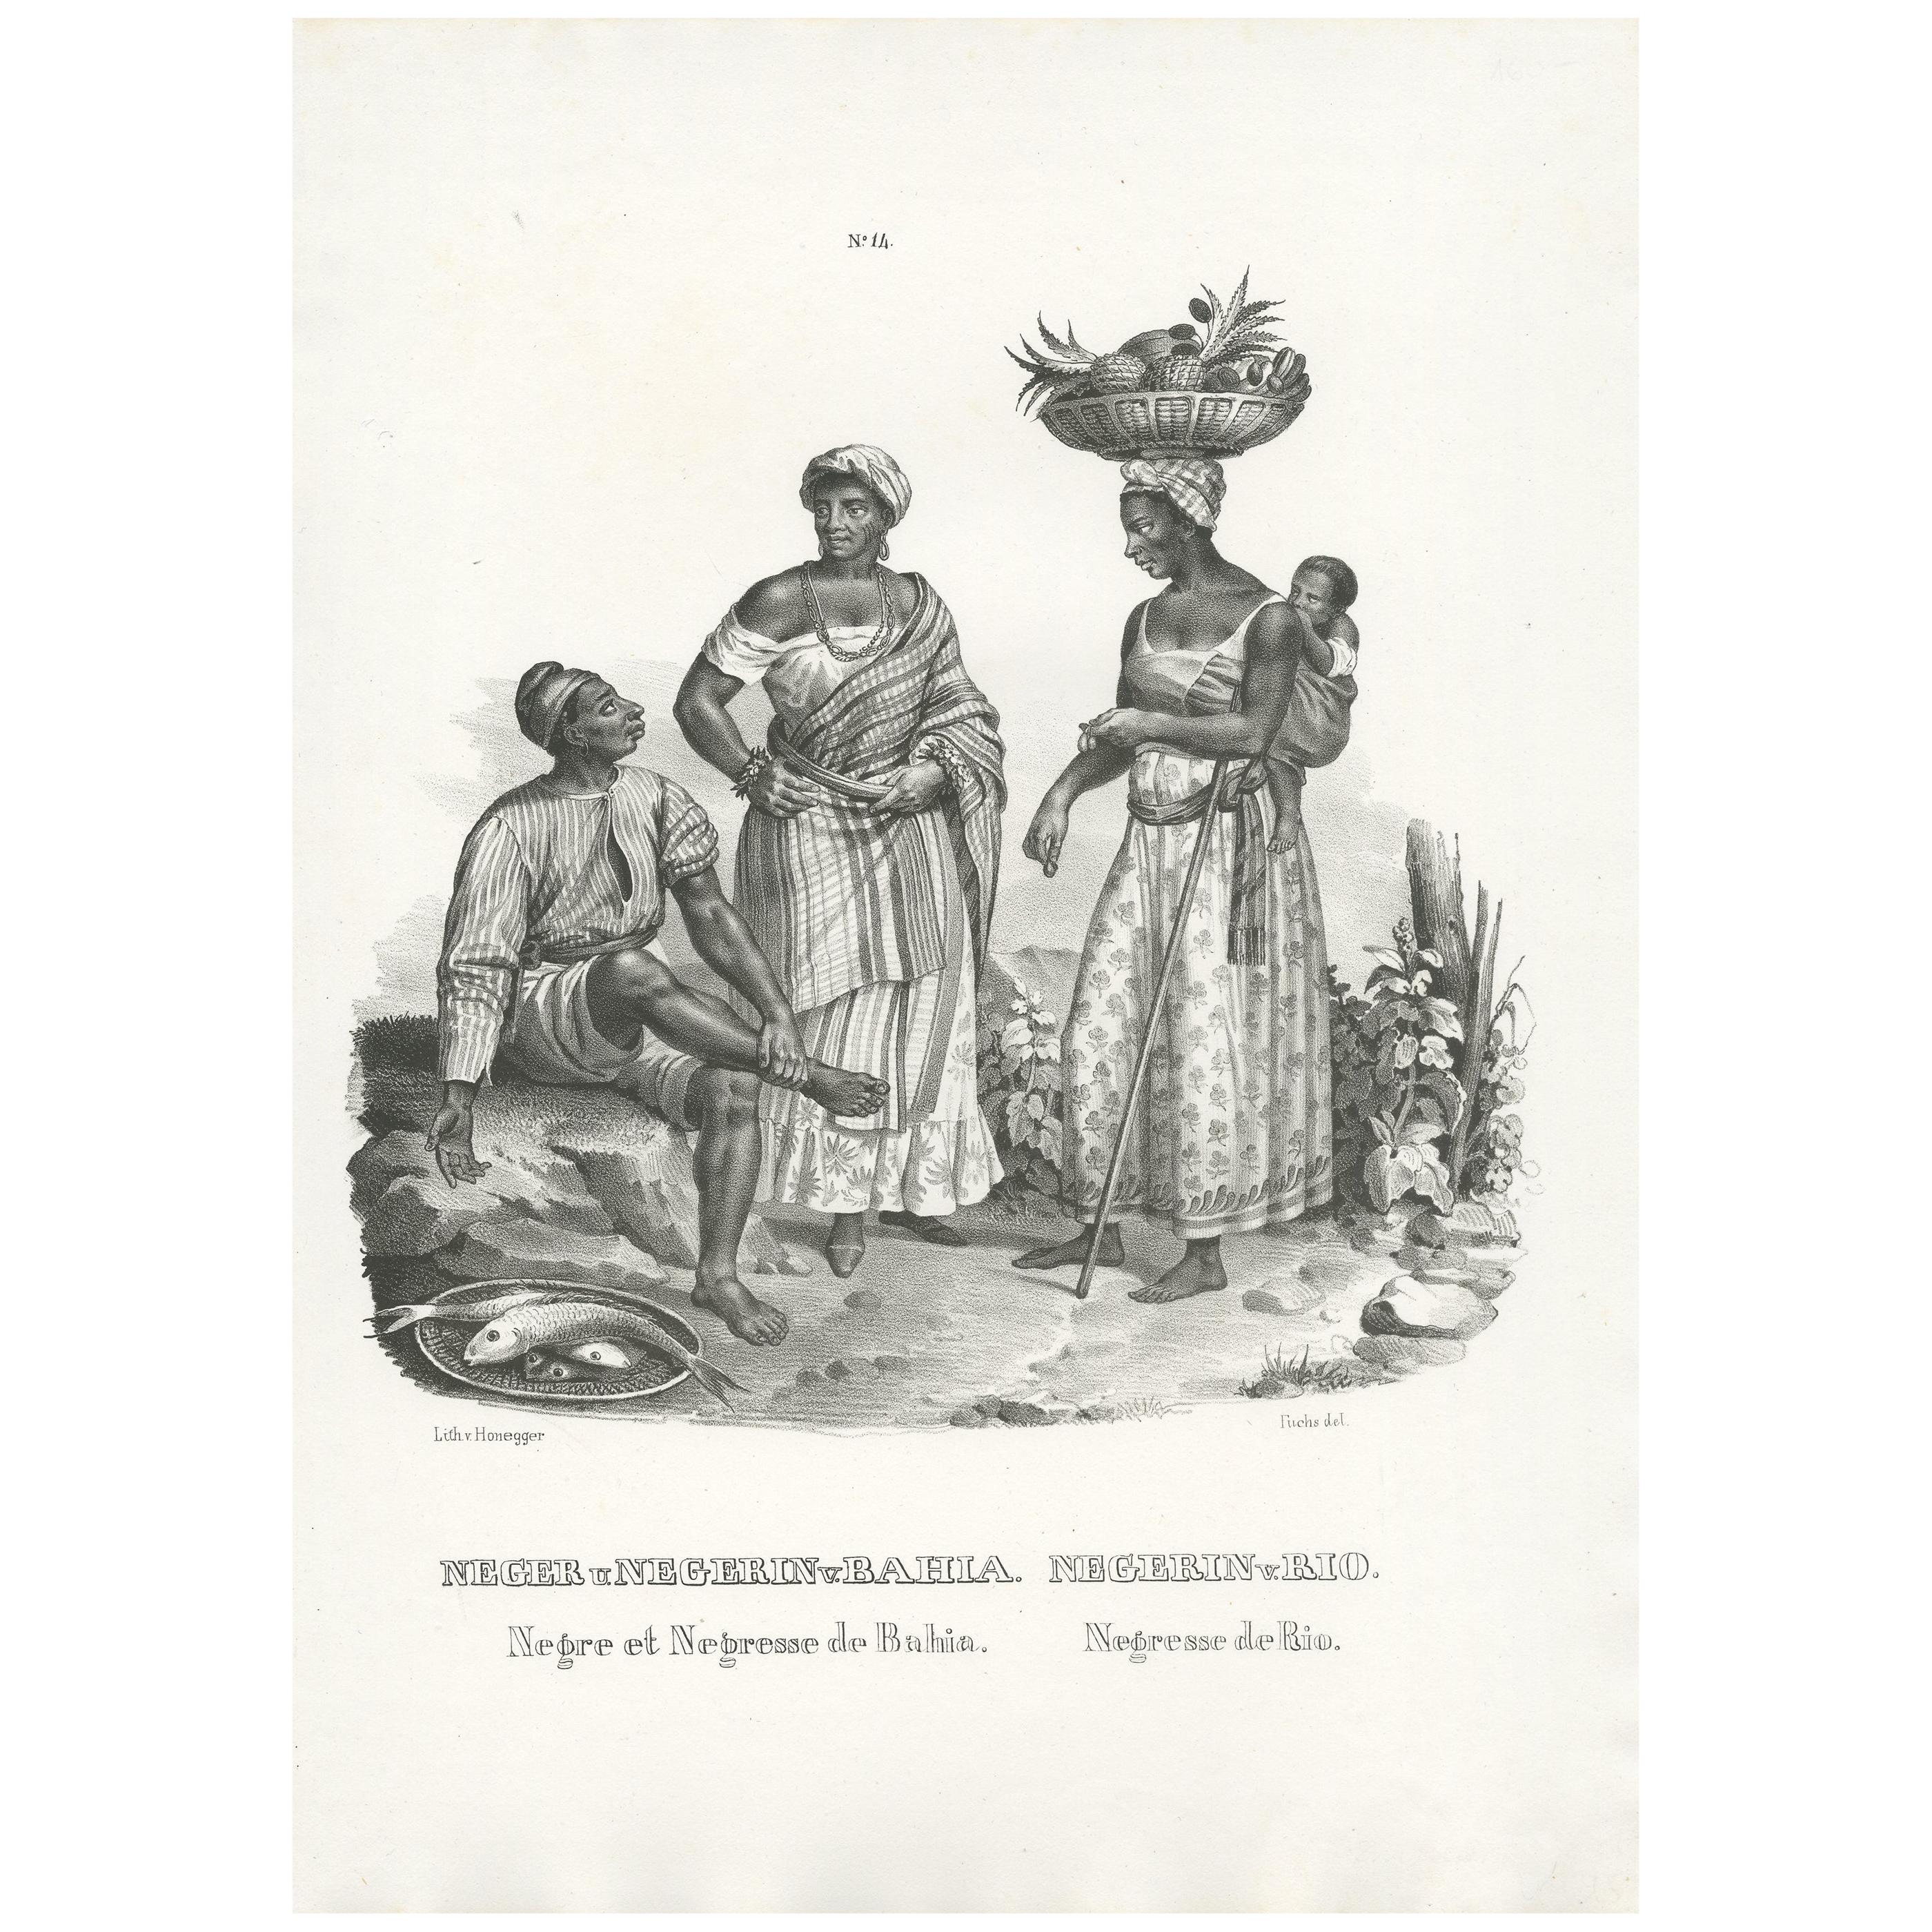 Antique Print of Natives of Bahia and Rio by Honegger (1845) For Sale